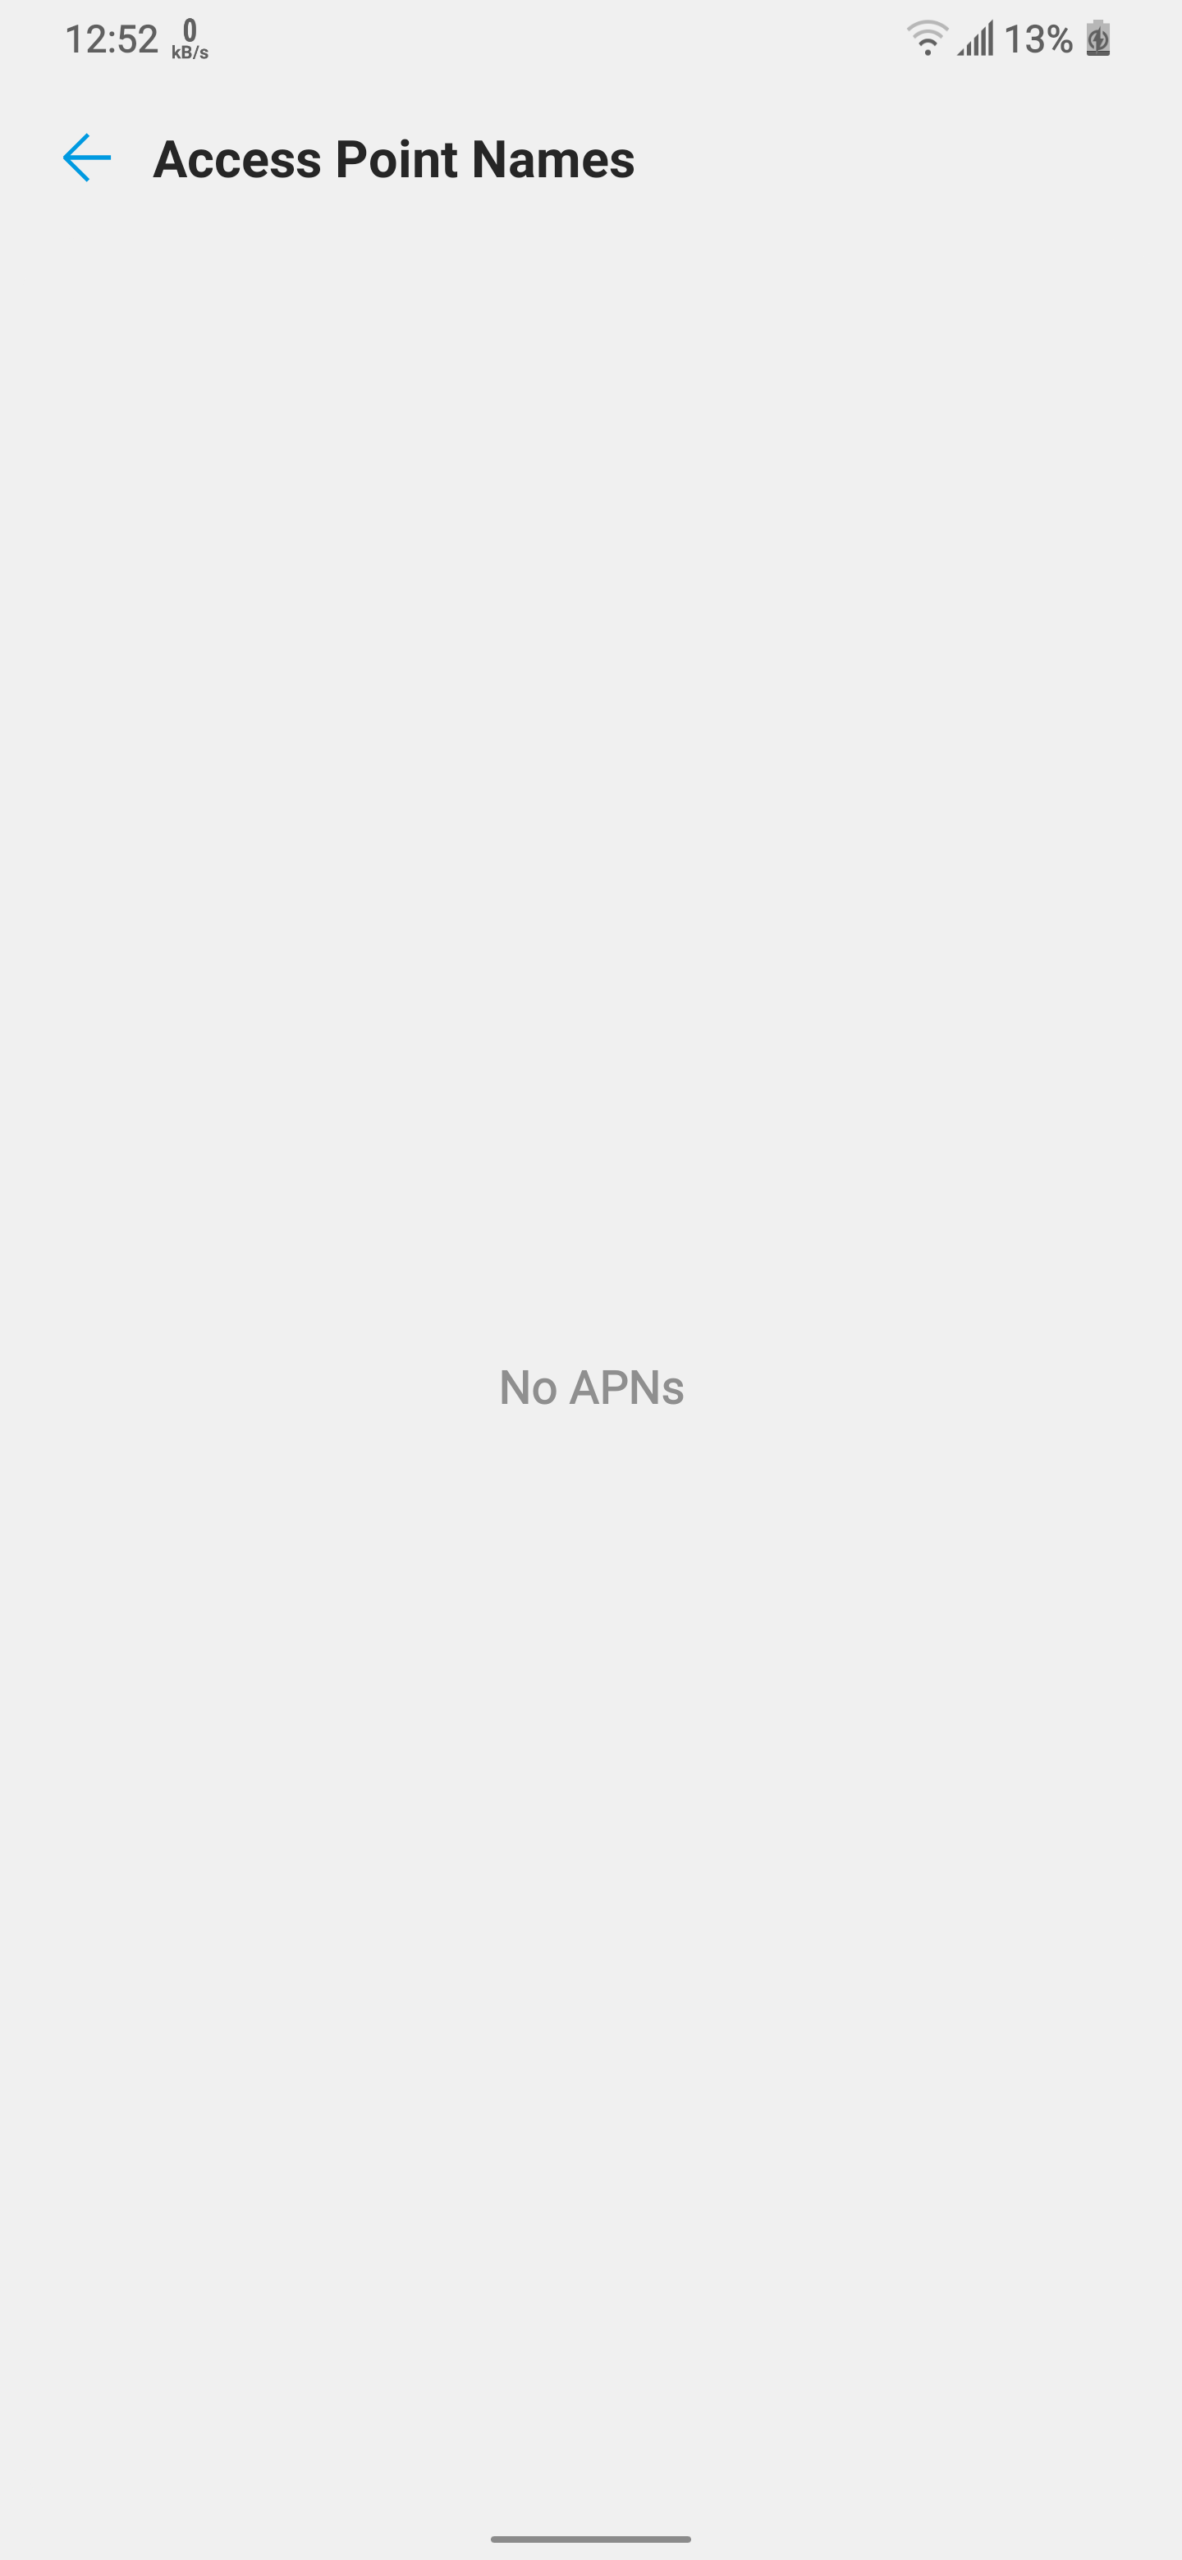 APN not available for this user screenshot